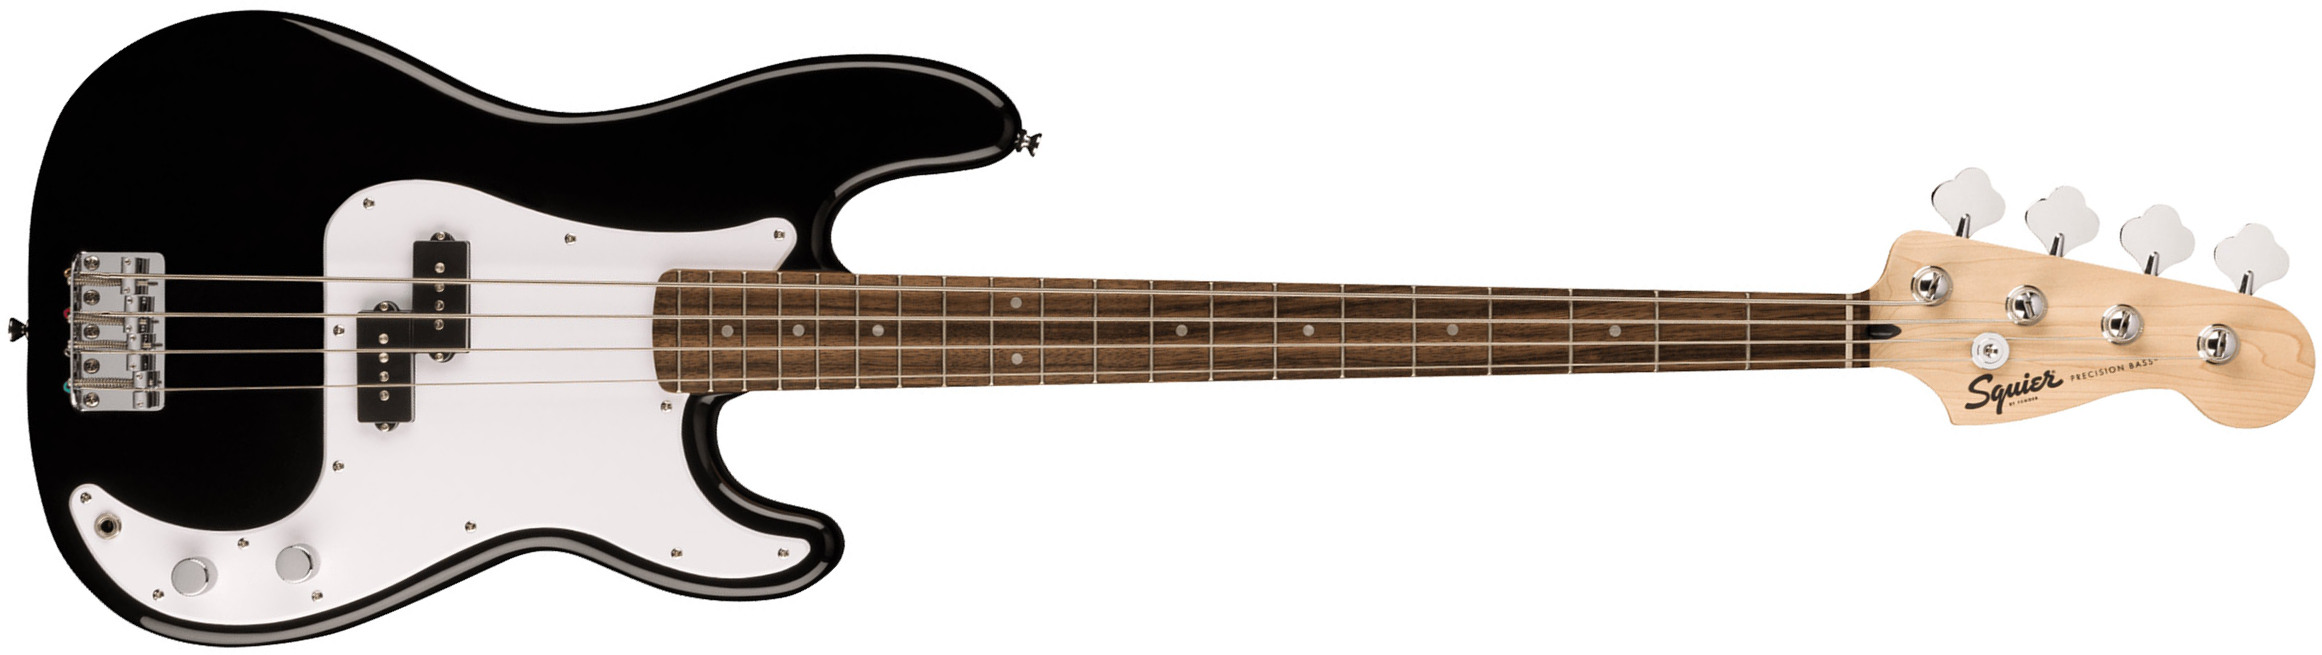 Squier Precision Bass Sonic Lau - Black - Solid body electric bass - Main picture